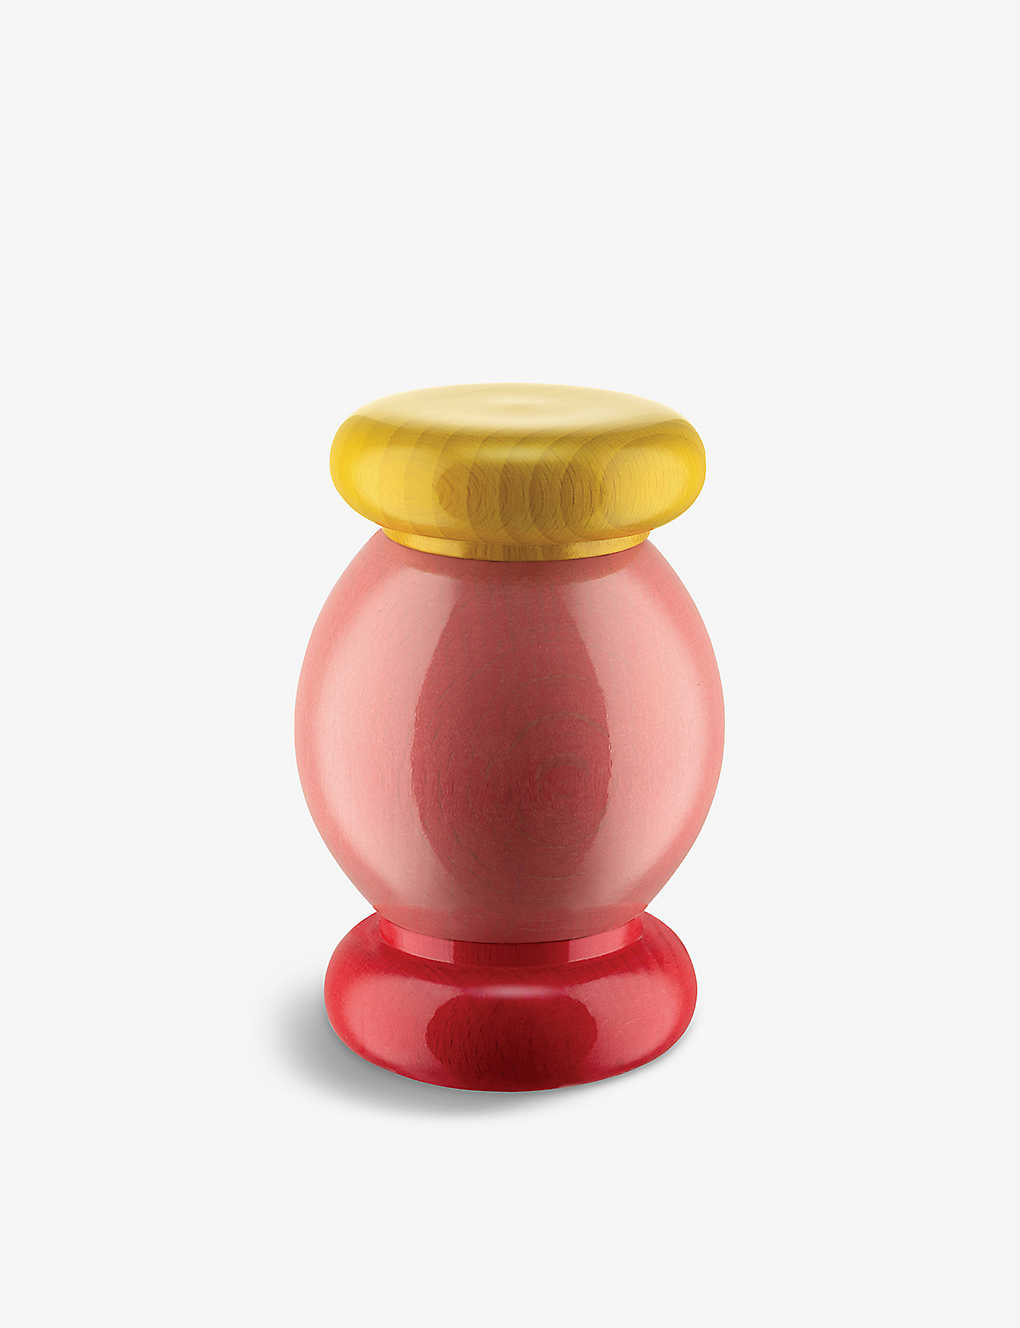 Alessi Ettore Sottsass Beech-wood Salt And Pepper Castor 11cm In Nocolor